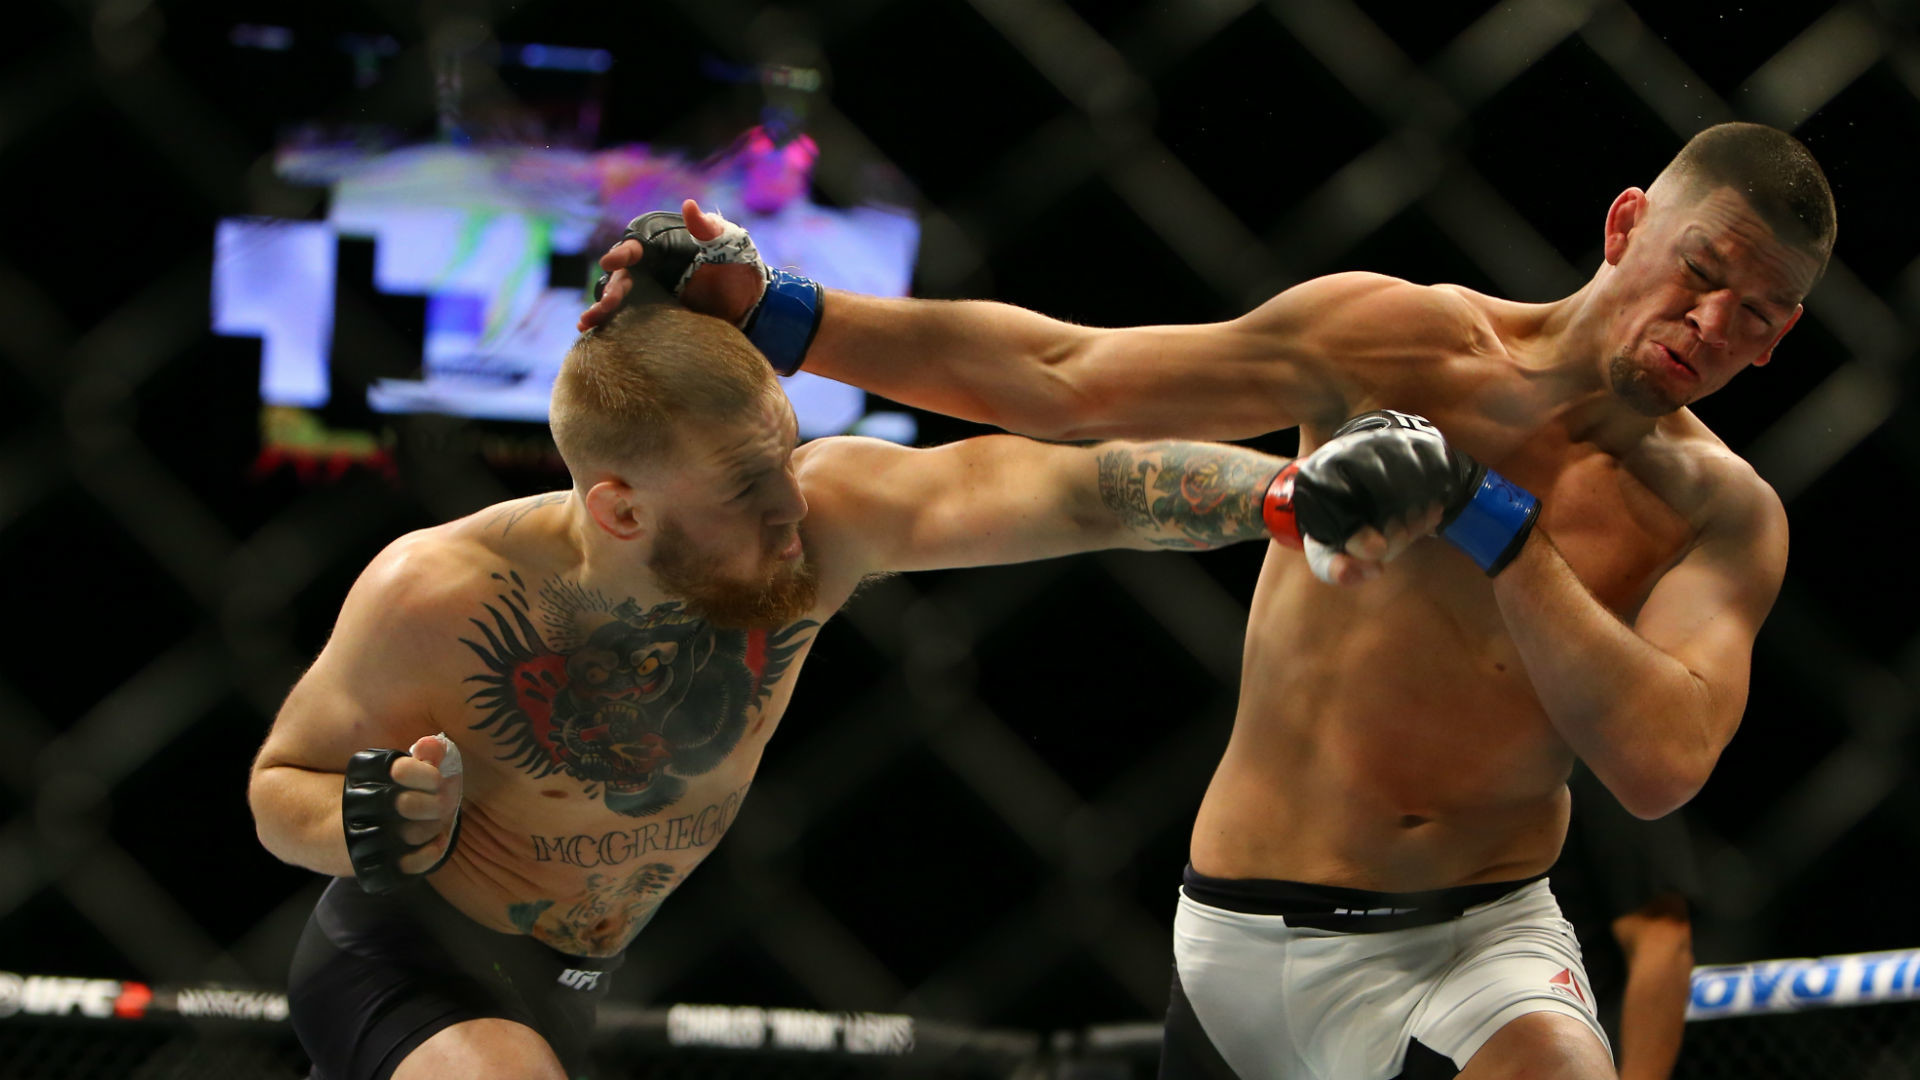 1920x1080 McGregor, Diaz rematch scheduled for UFC 202 | Other Sports | Sporting News